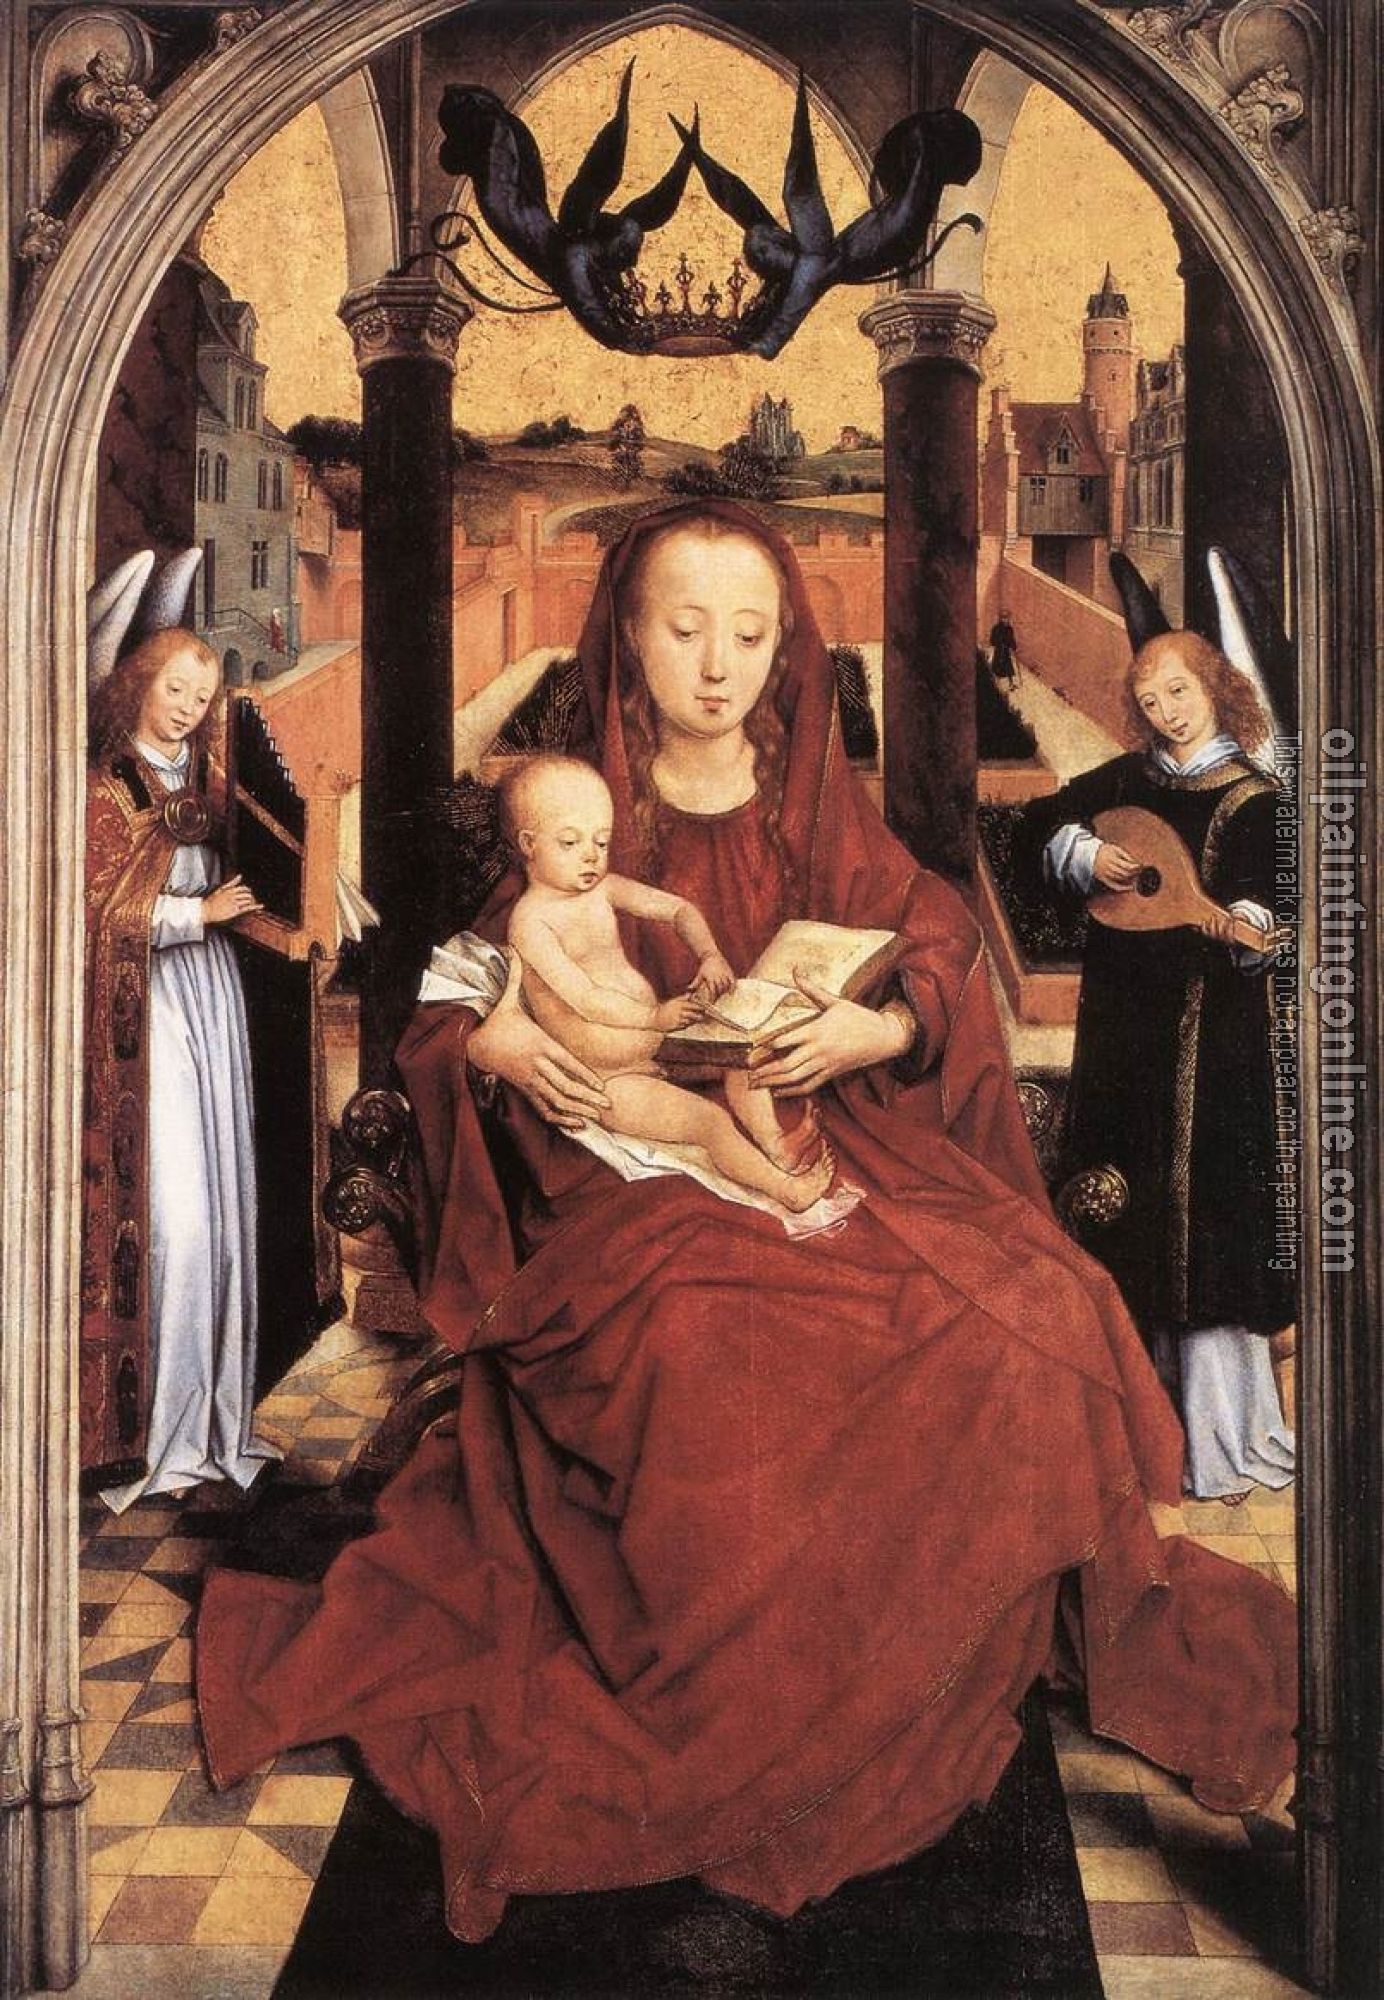 Memling, Hans - Virgin and Child Enthroned with two Musical Angels